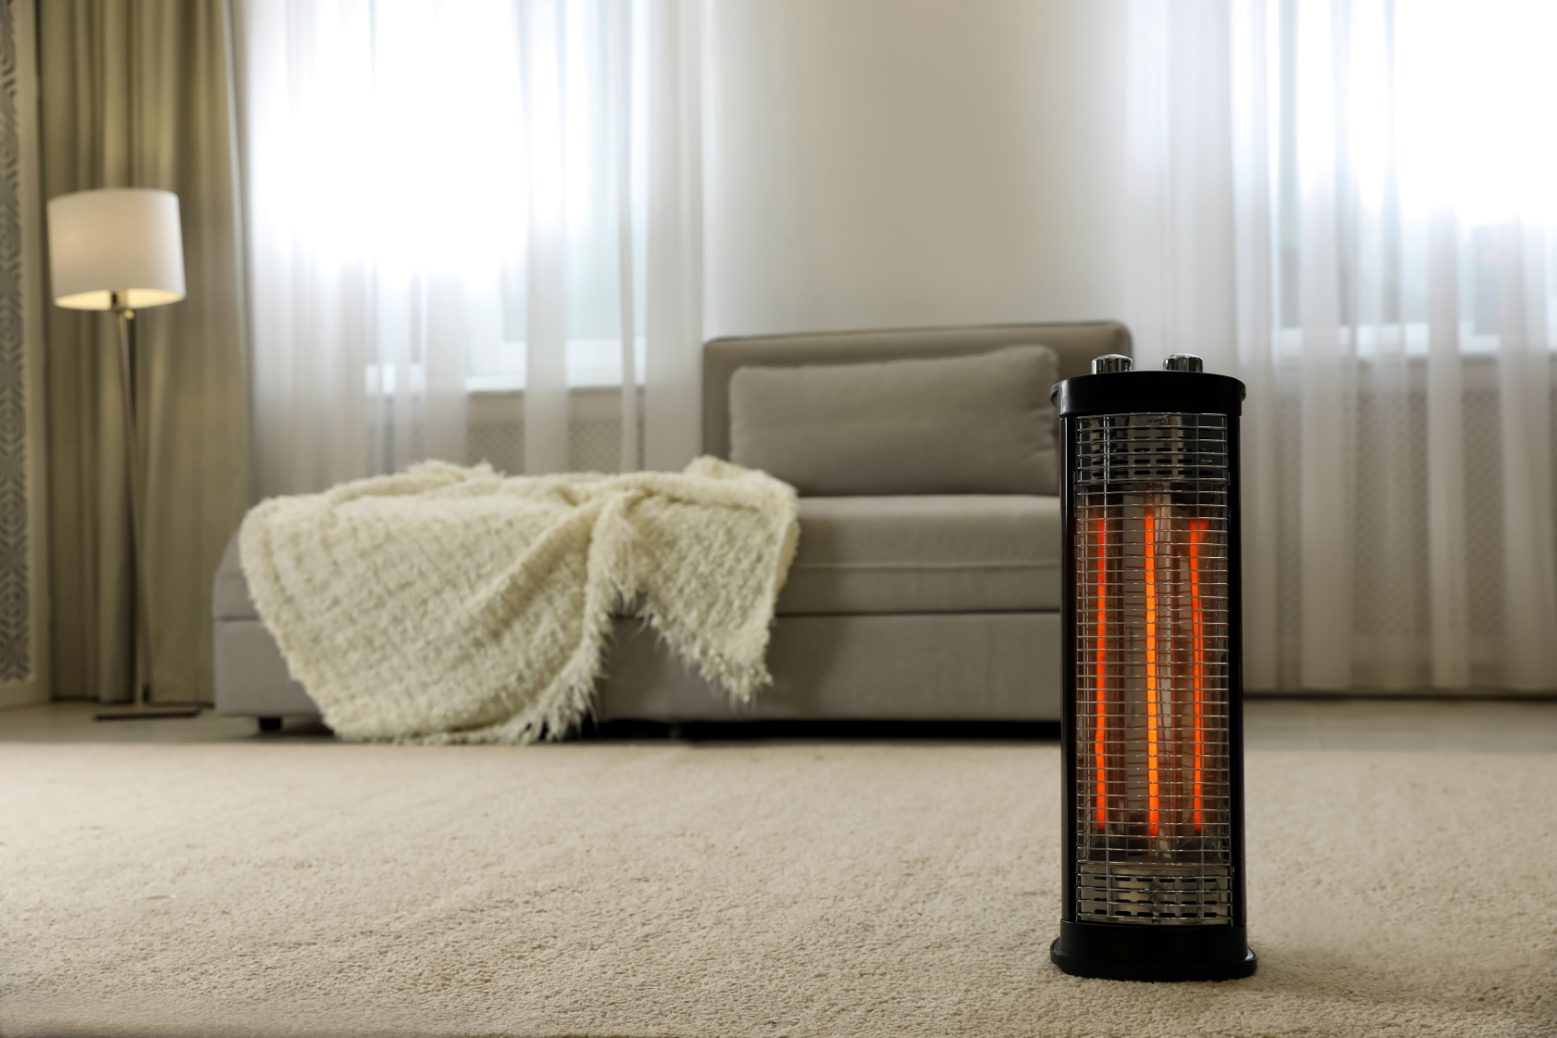 Small space heater in a large living room, in front of a couch with a blanket on it